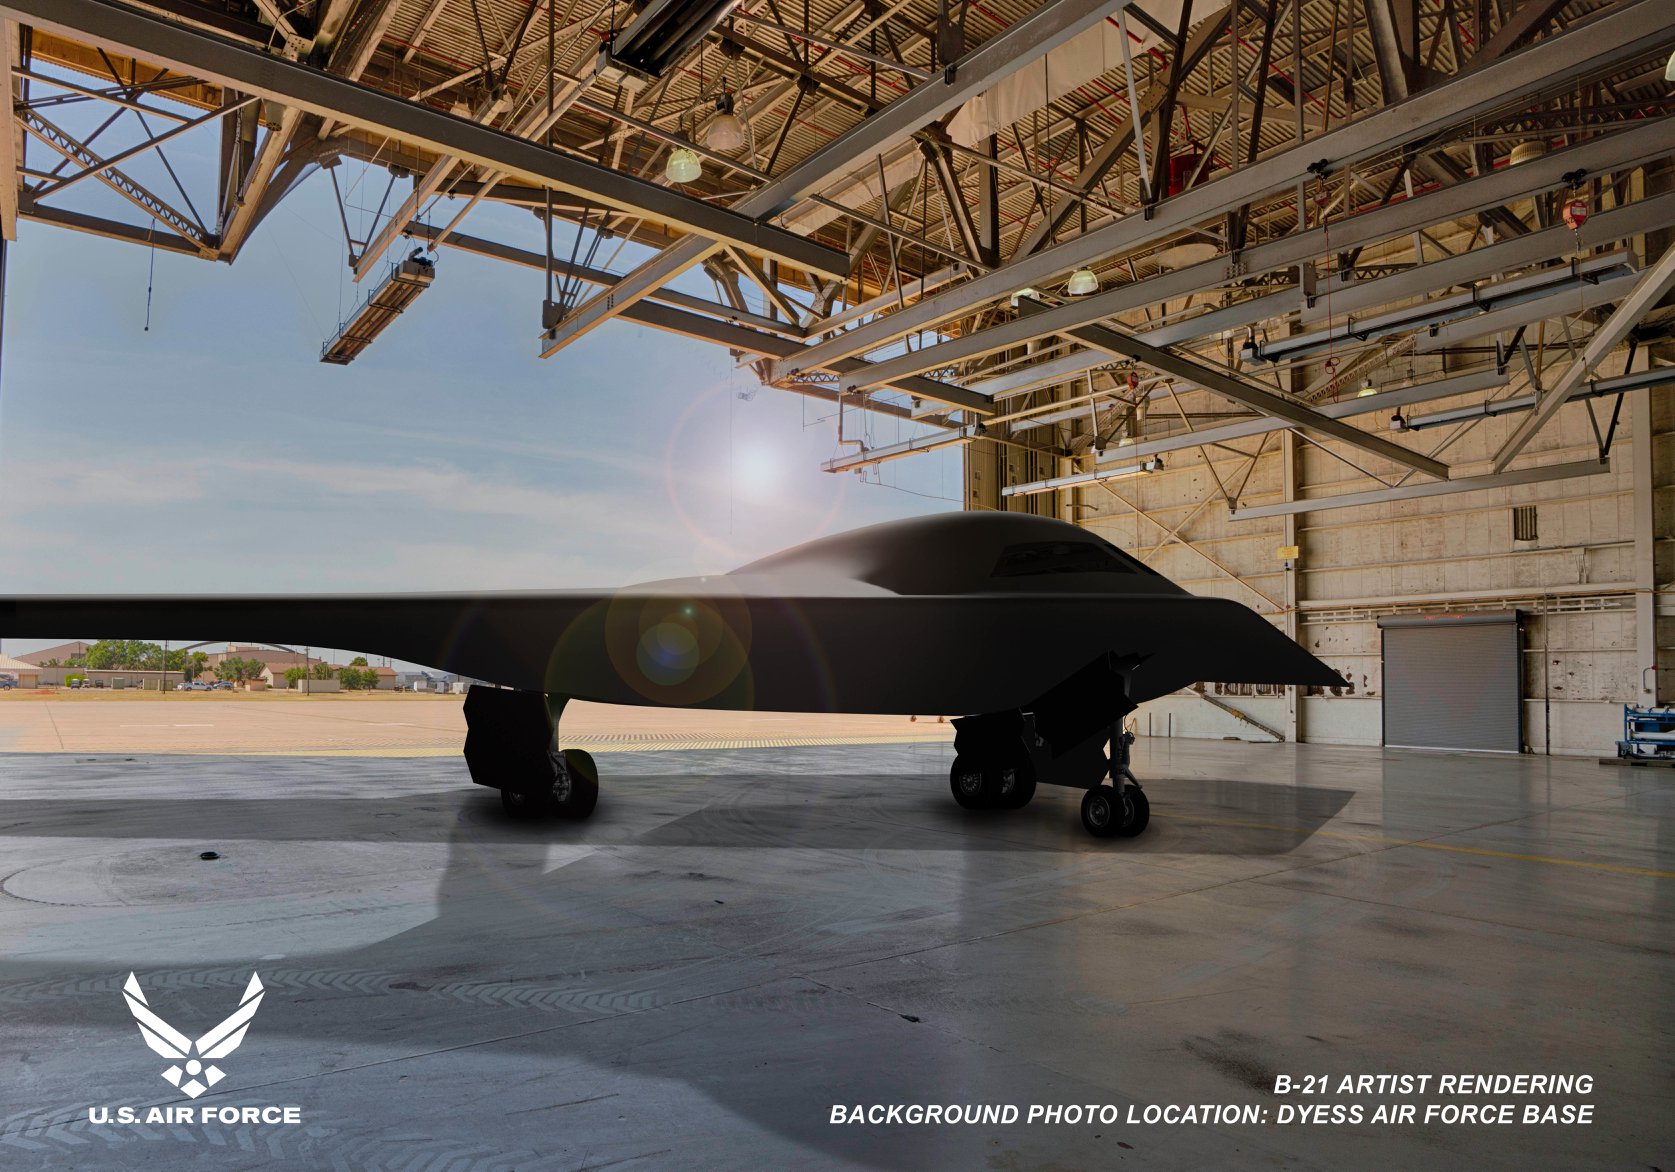 Let's Have A Look At The New B-21 "Raider" Stealth Bomber Renderings The Air Force Has Just Released - The Aviationist